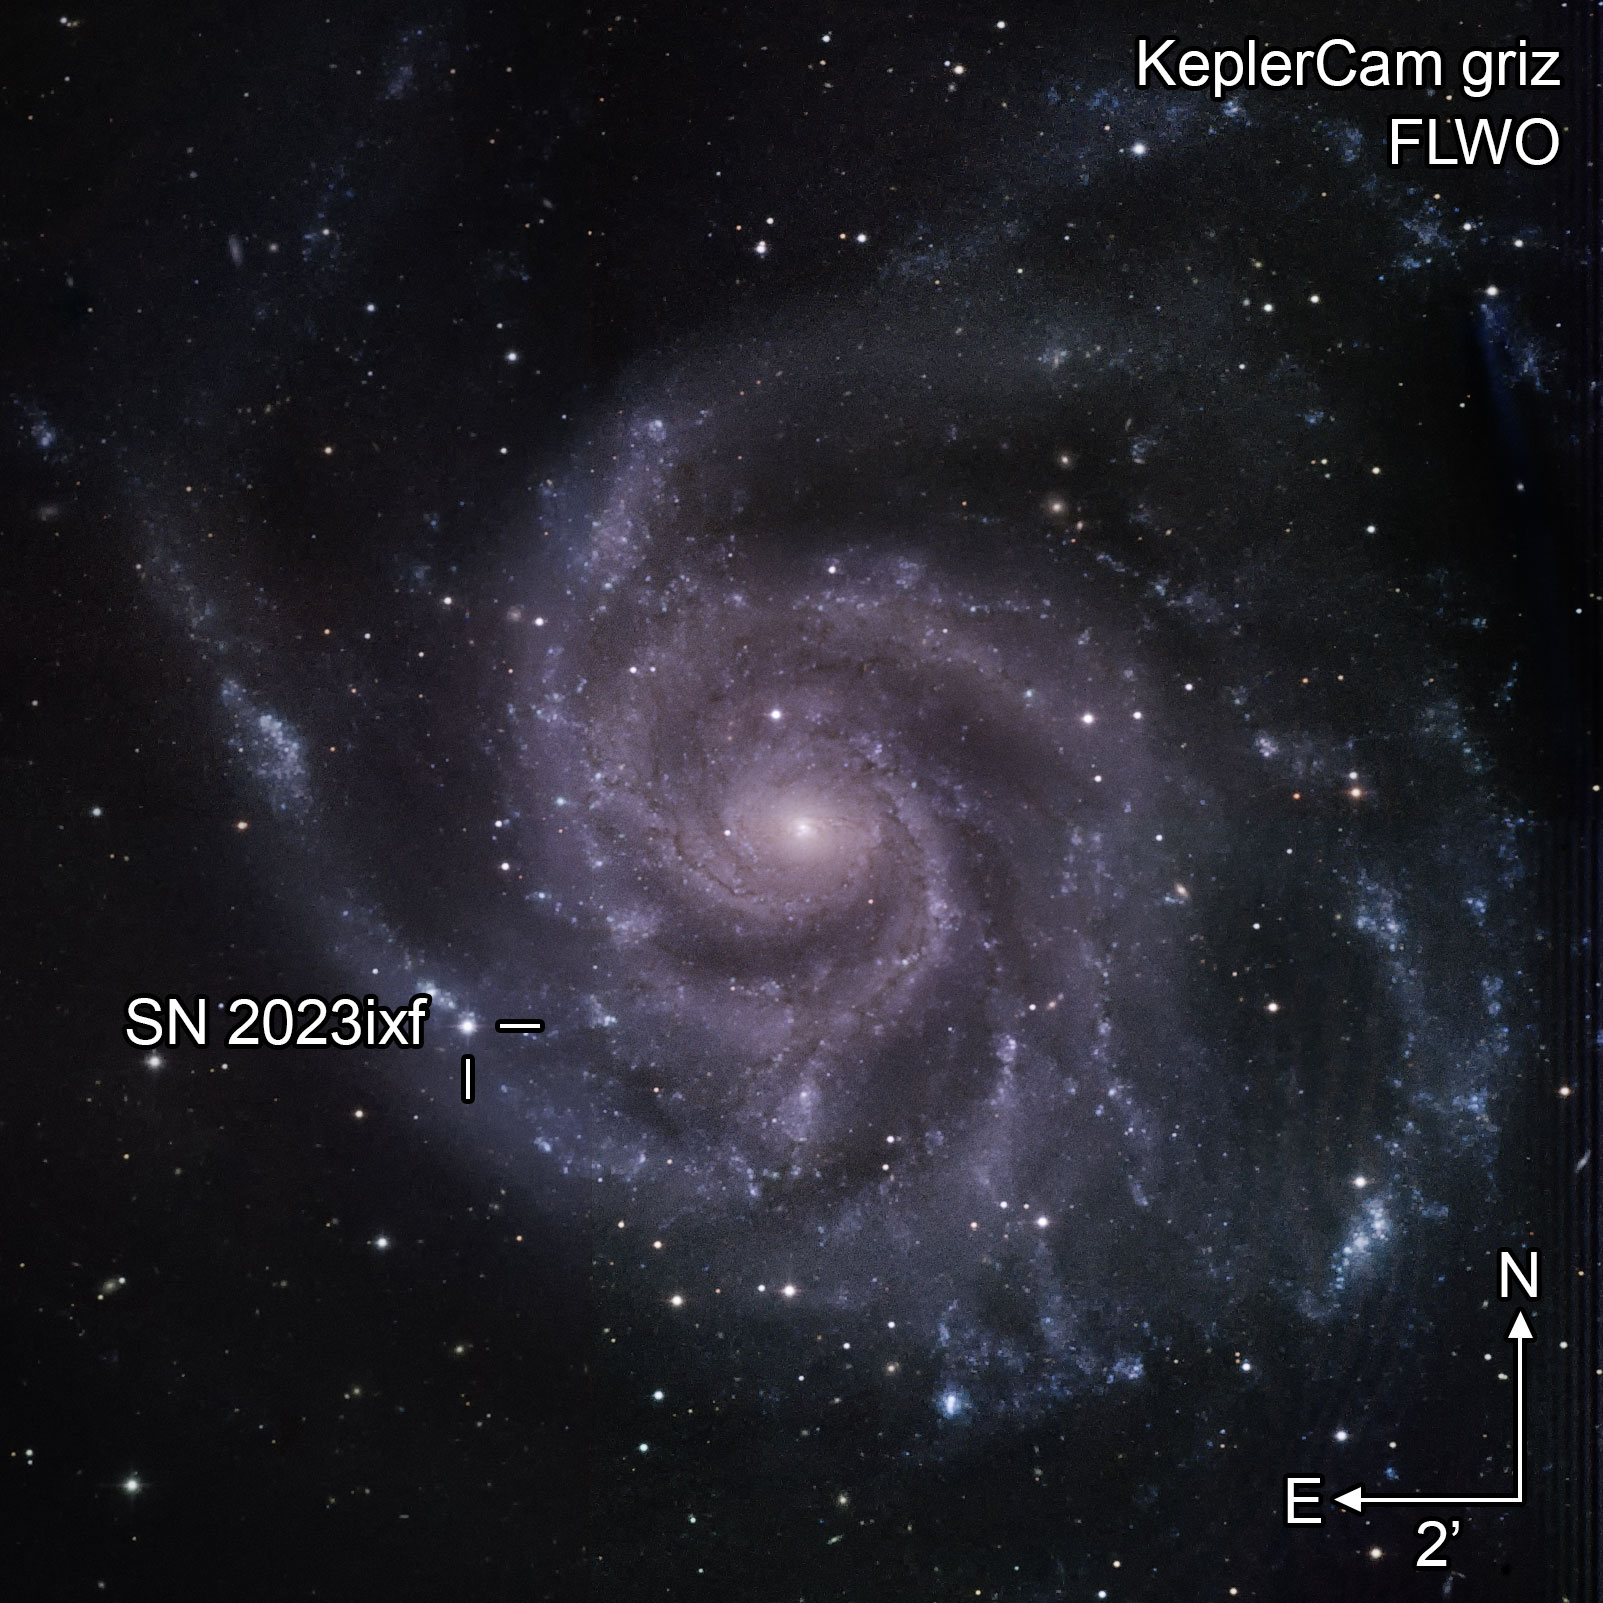 a spiral galaxy is imaged, with indications pointing to a point of light on an arm, labeled SN 2023ixf